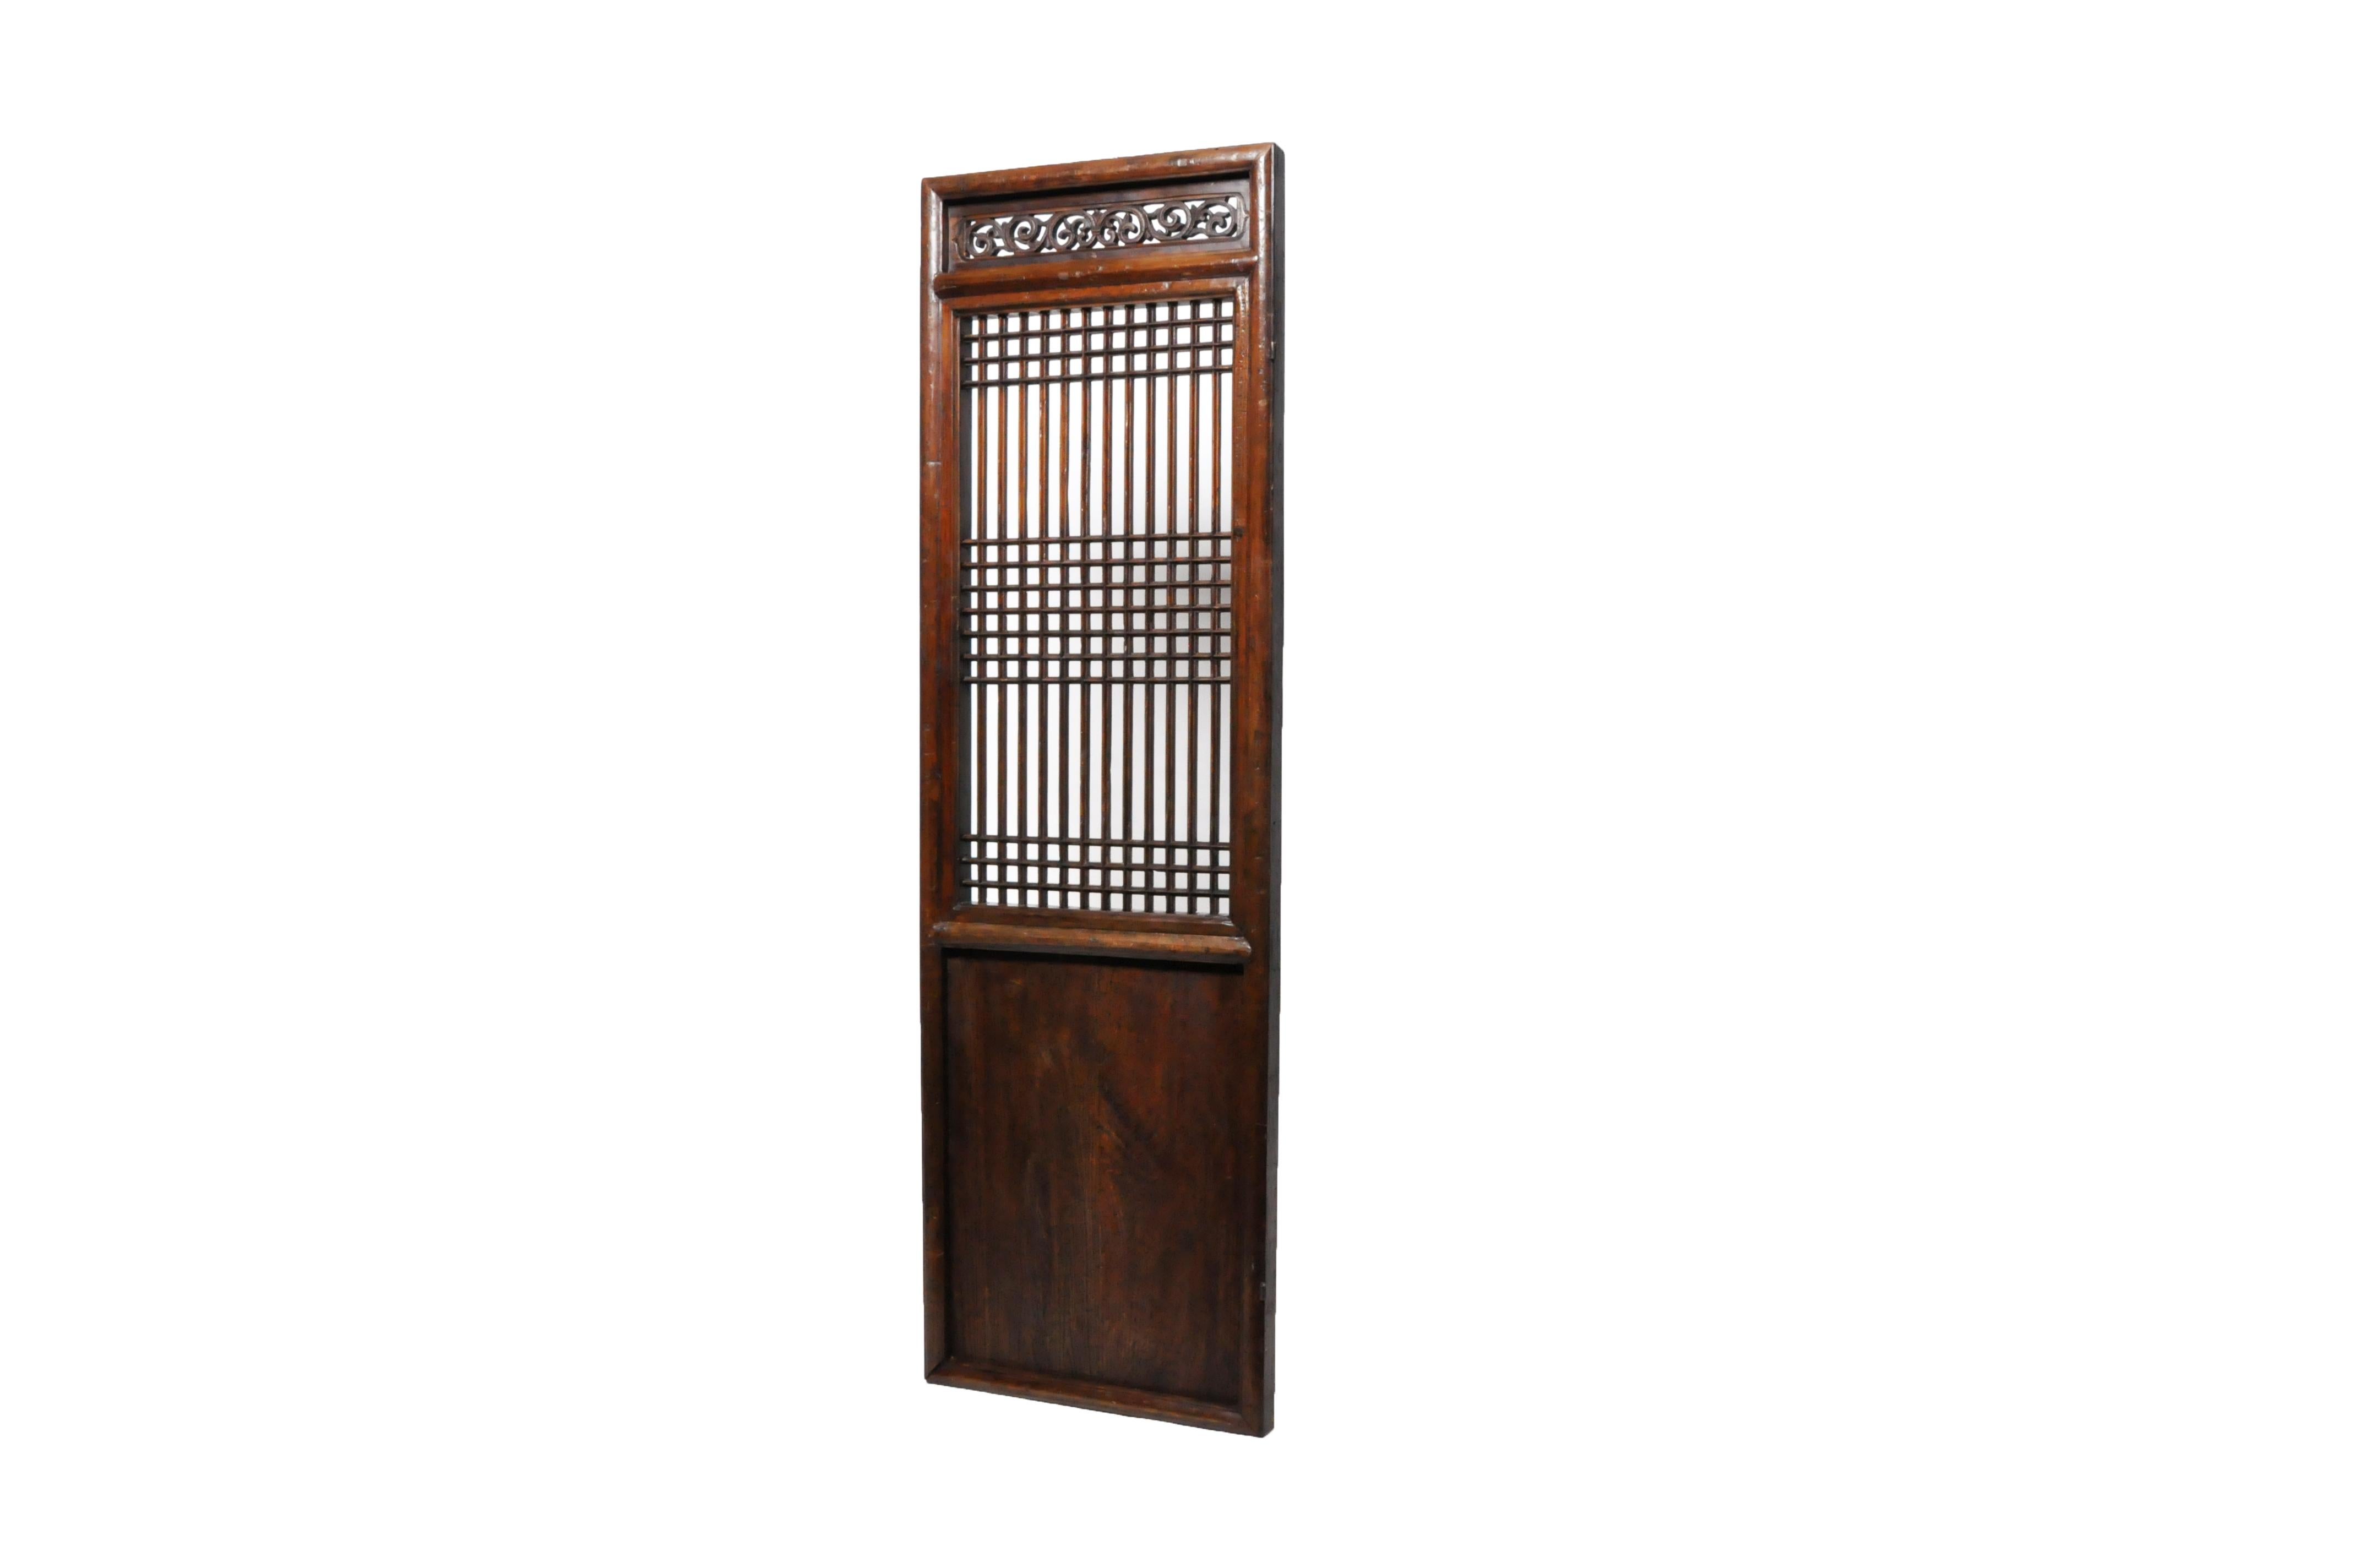 This elm wood door was once part of a large series that surrounded a private courtyard in a Northern Chinese house. It features fine latticework and carved details. The patina is original with the addition of French polish and beeswax. It could be